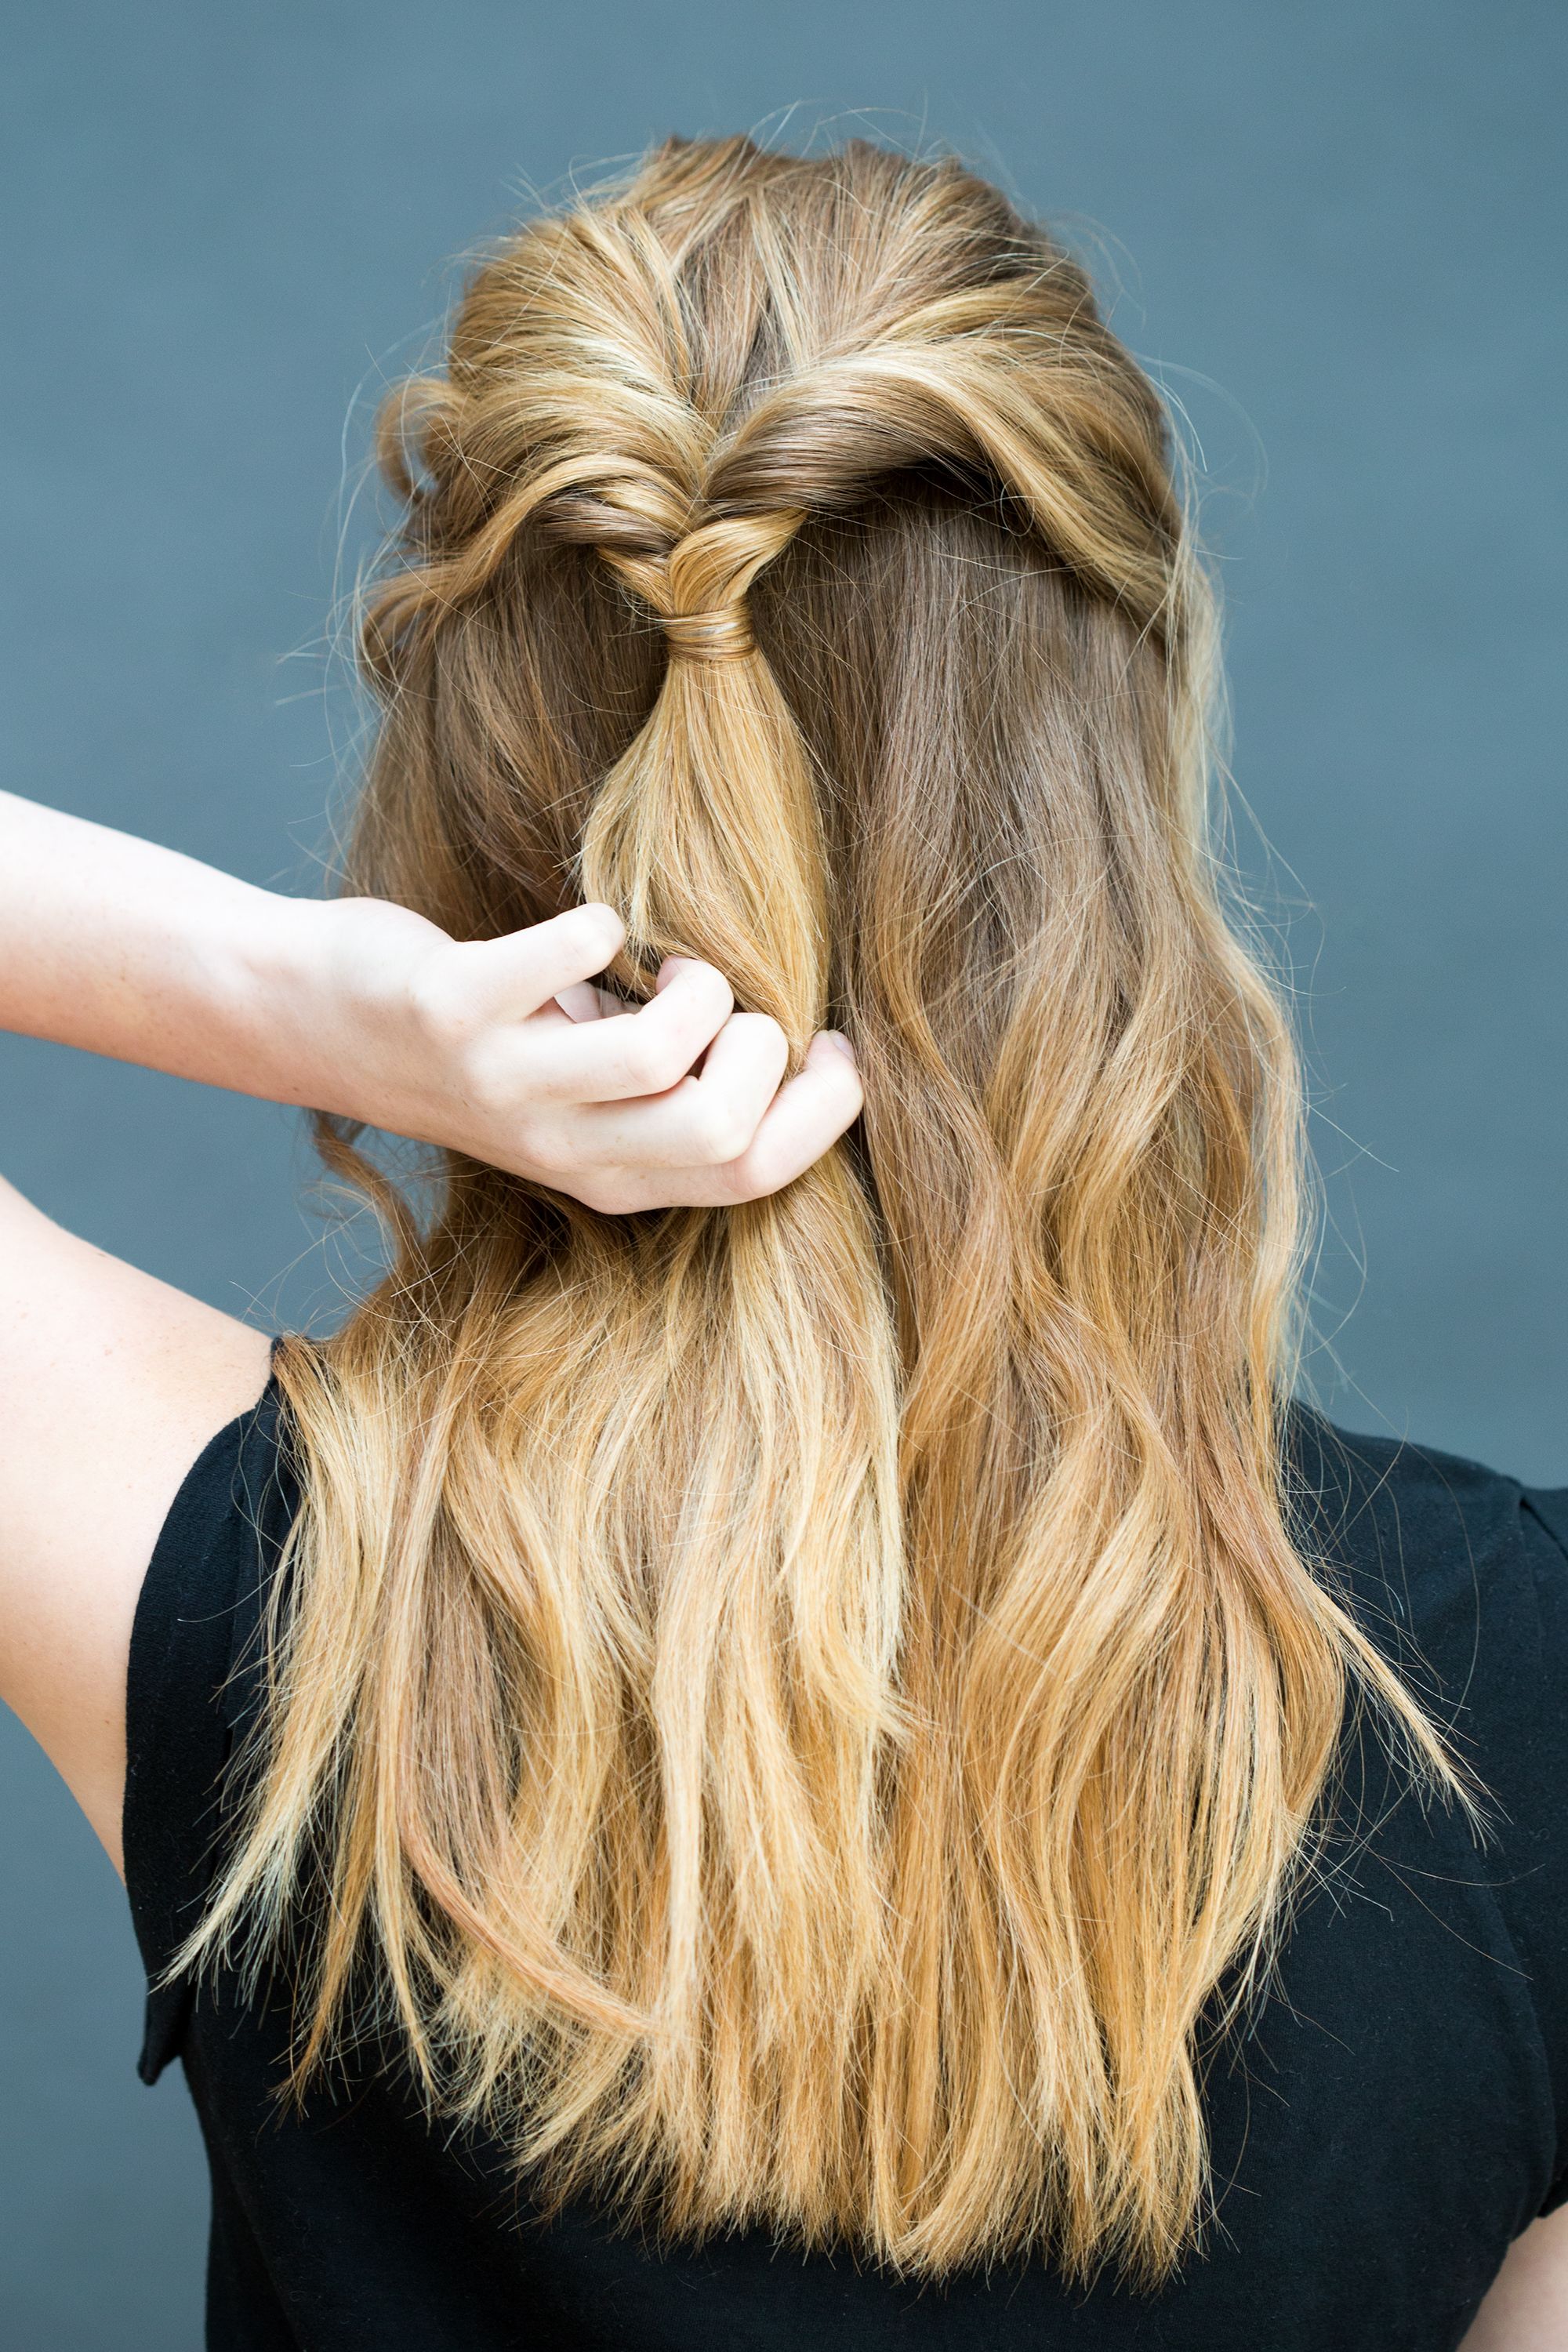 10 easy hairstyles you can do in 10 seconds - diy hairstyles